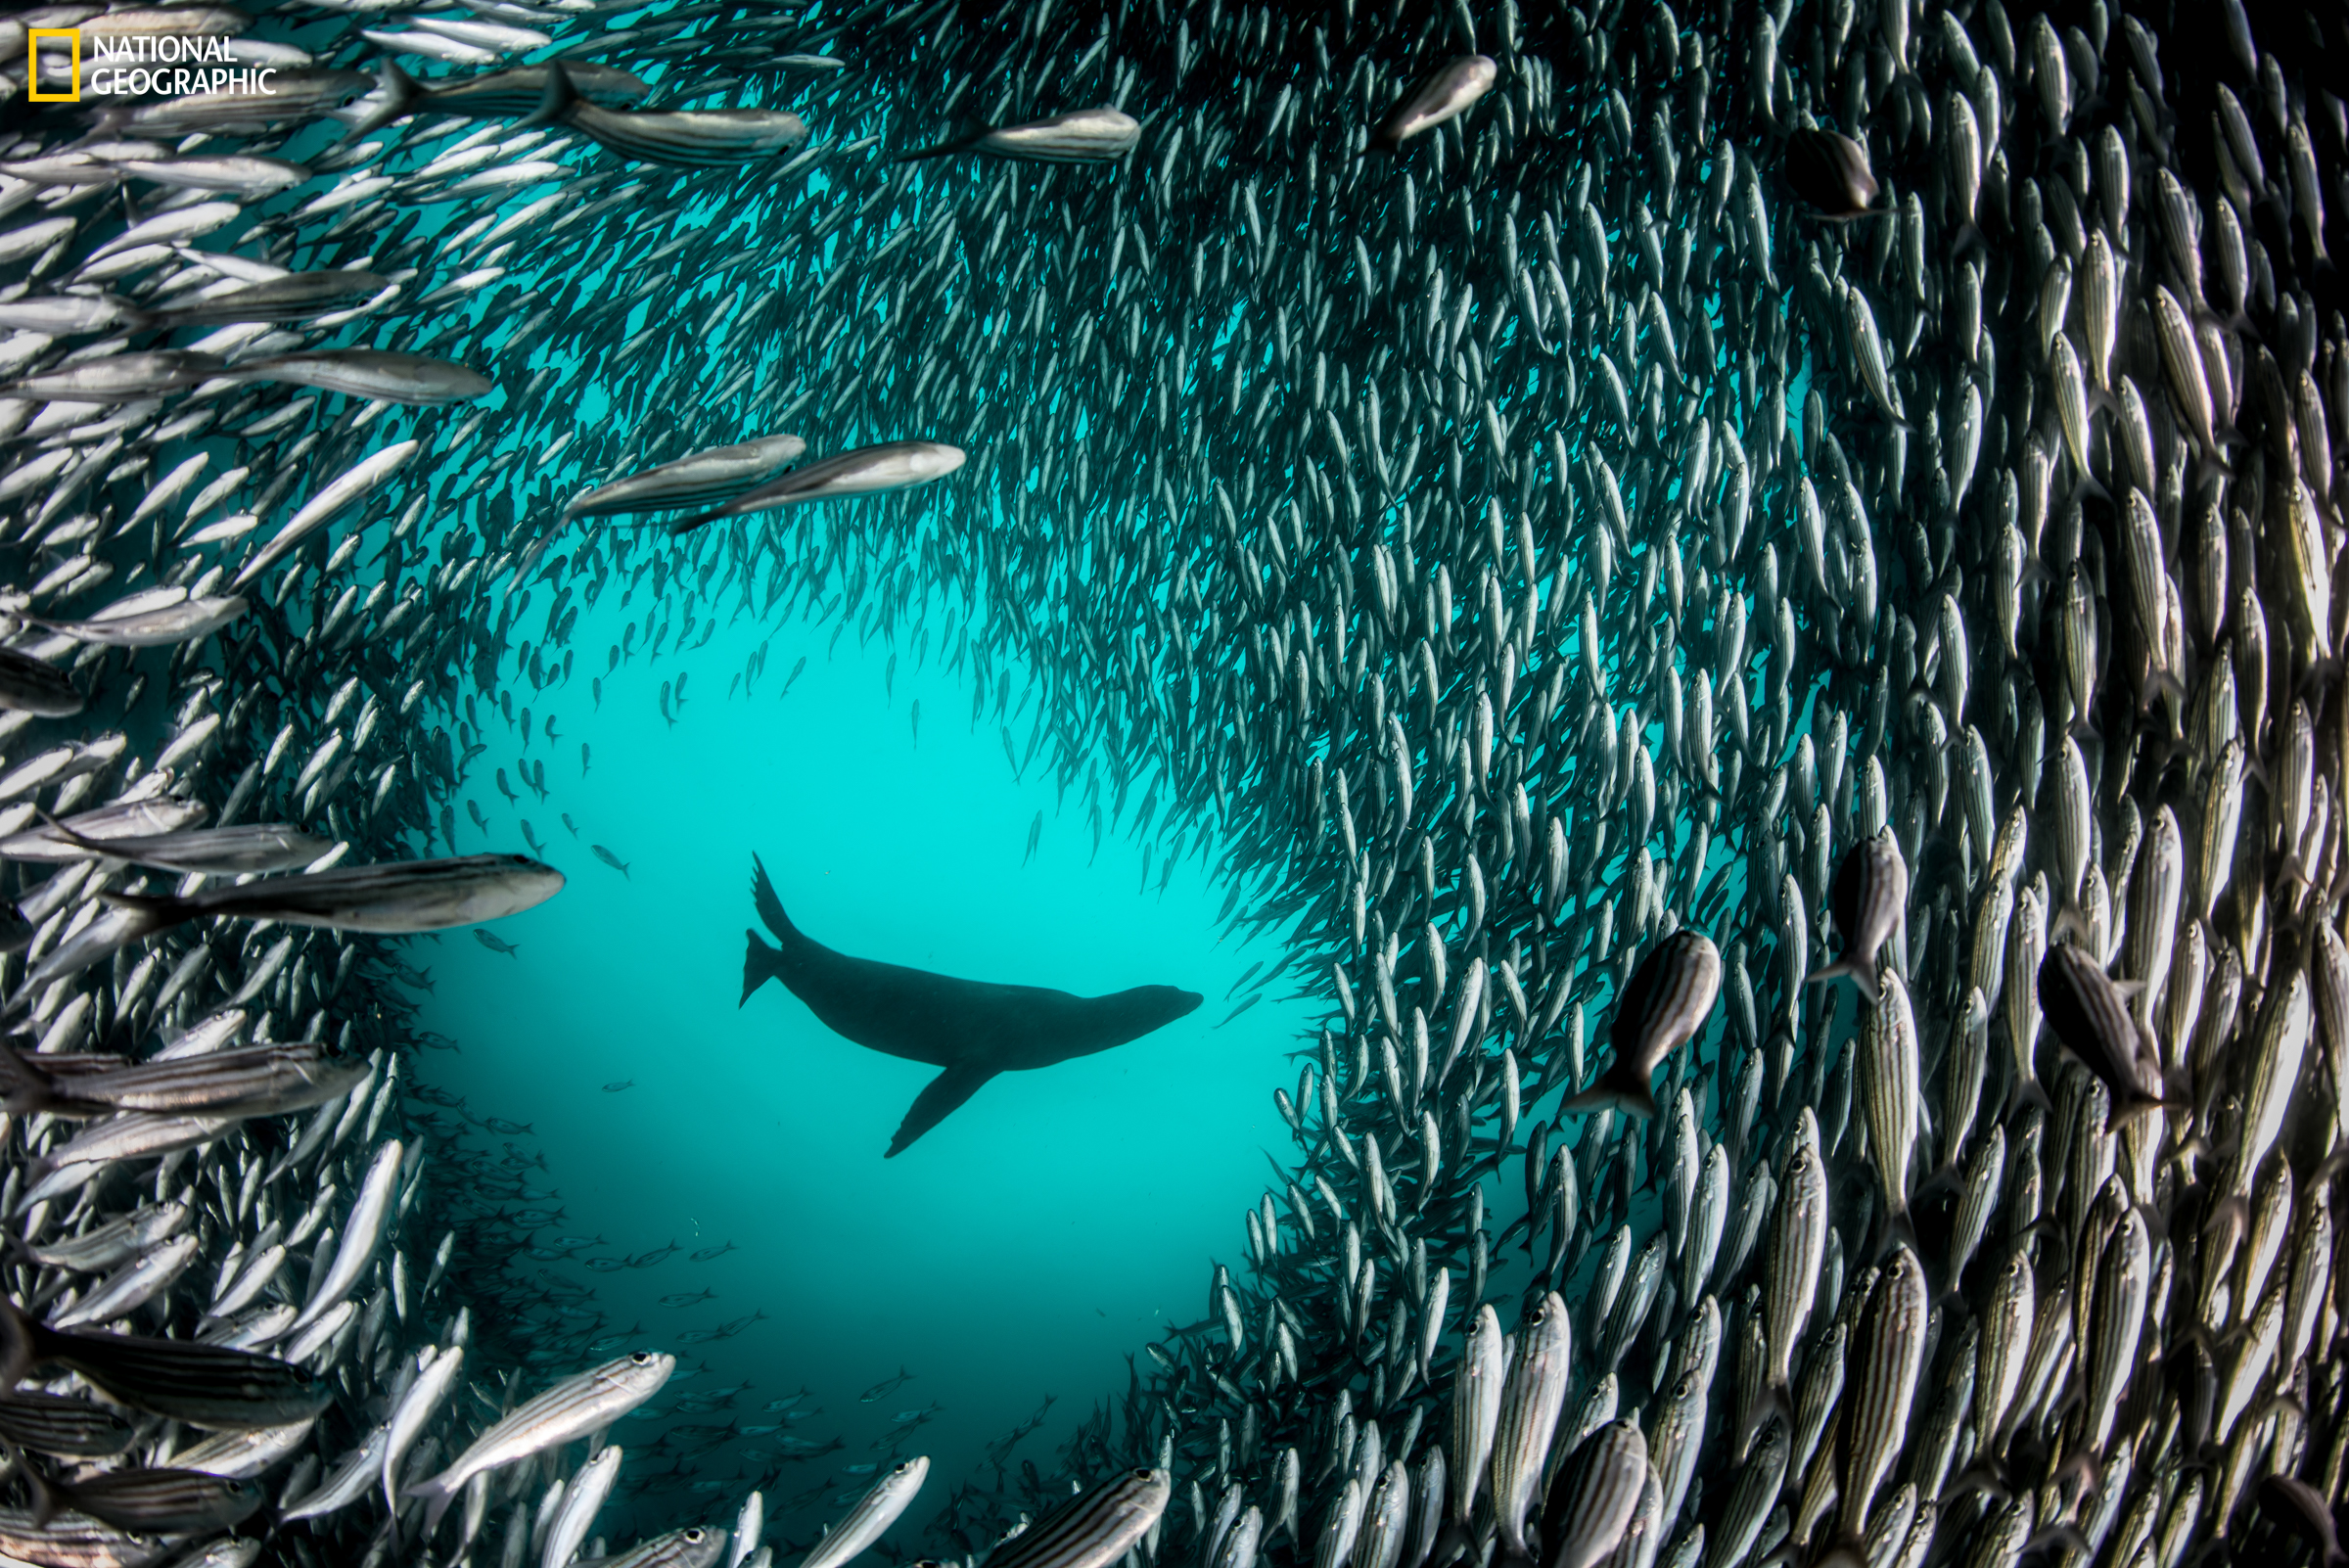 Pristine Seas National Geographic cr Enric Sala_2676504. Image of a seal surrounded by a school of fish forming a circle.